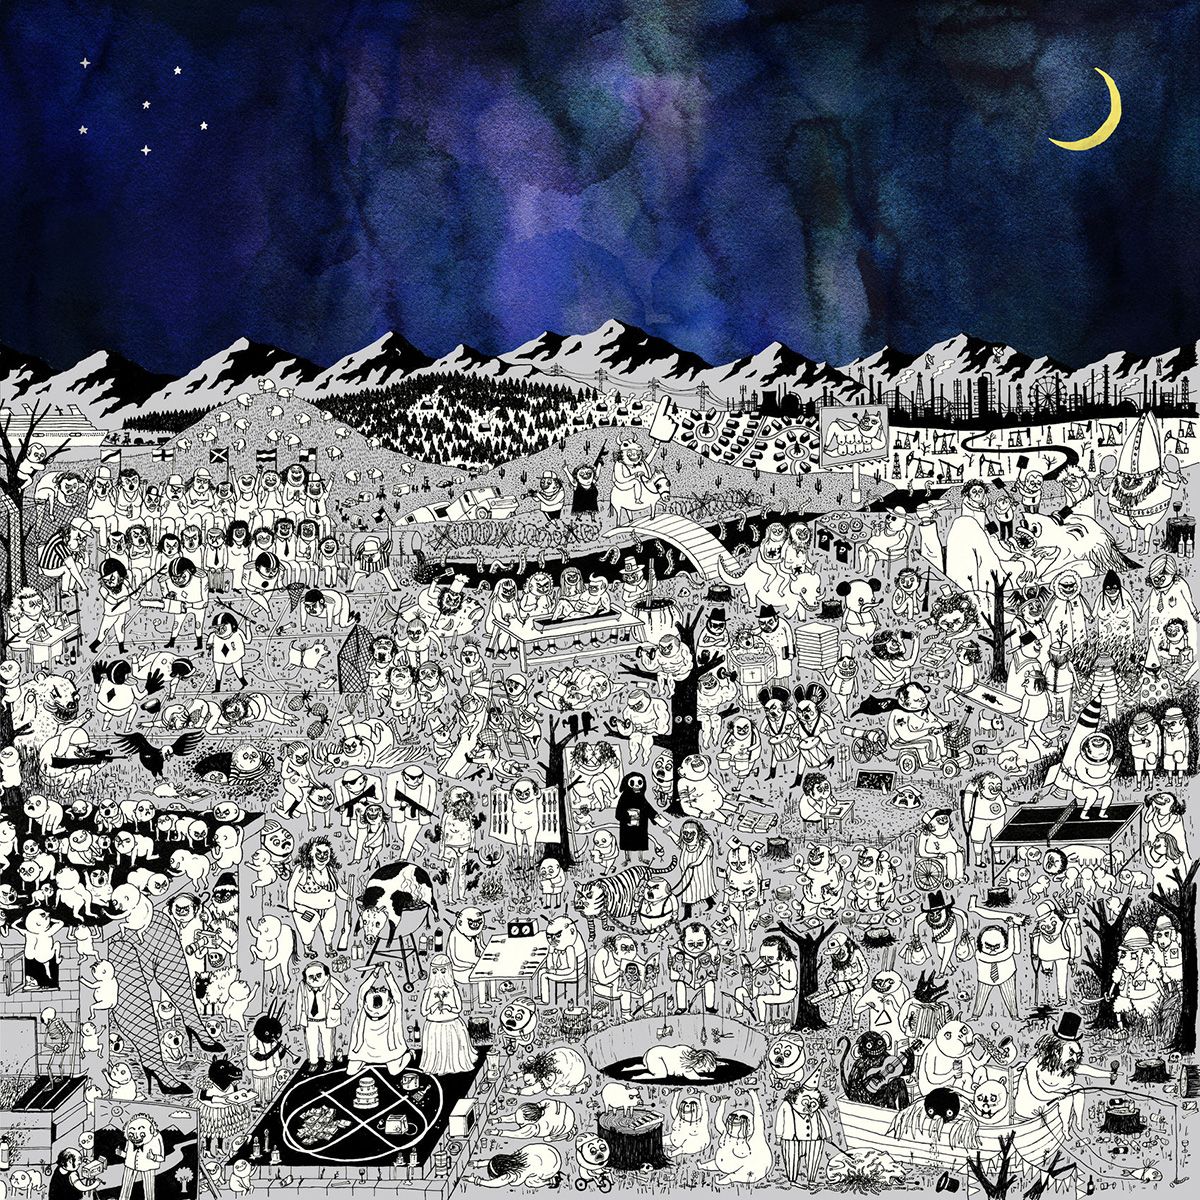 Father John Misty "Pure Comedy" Deluxe 2LP